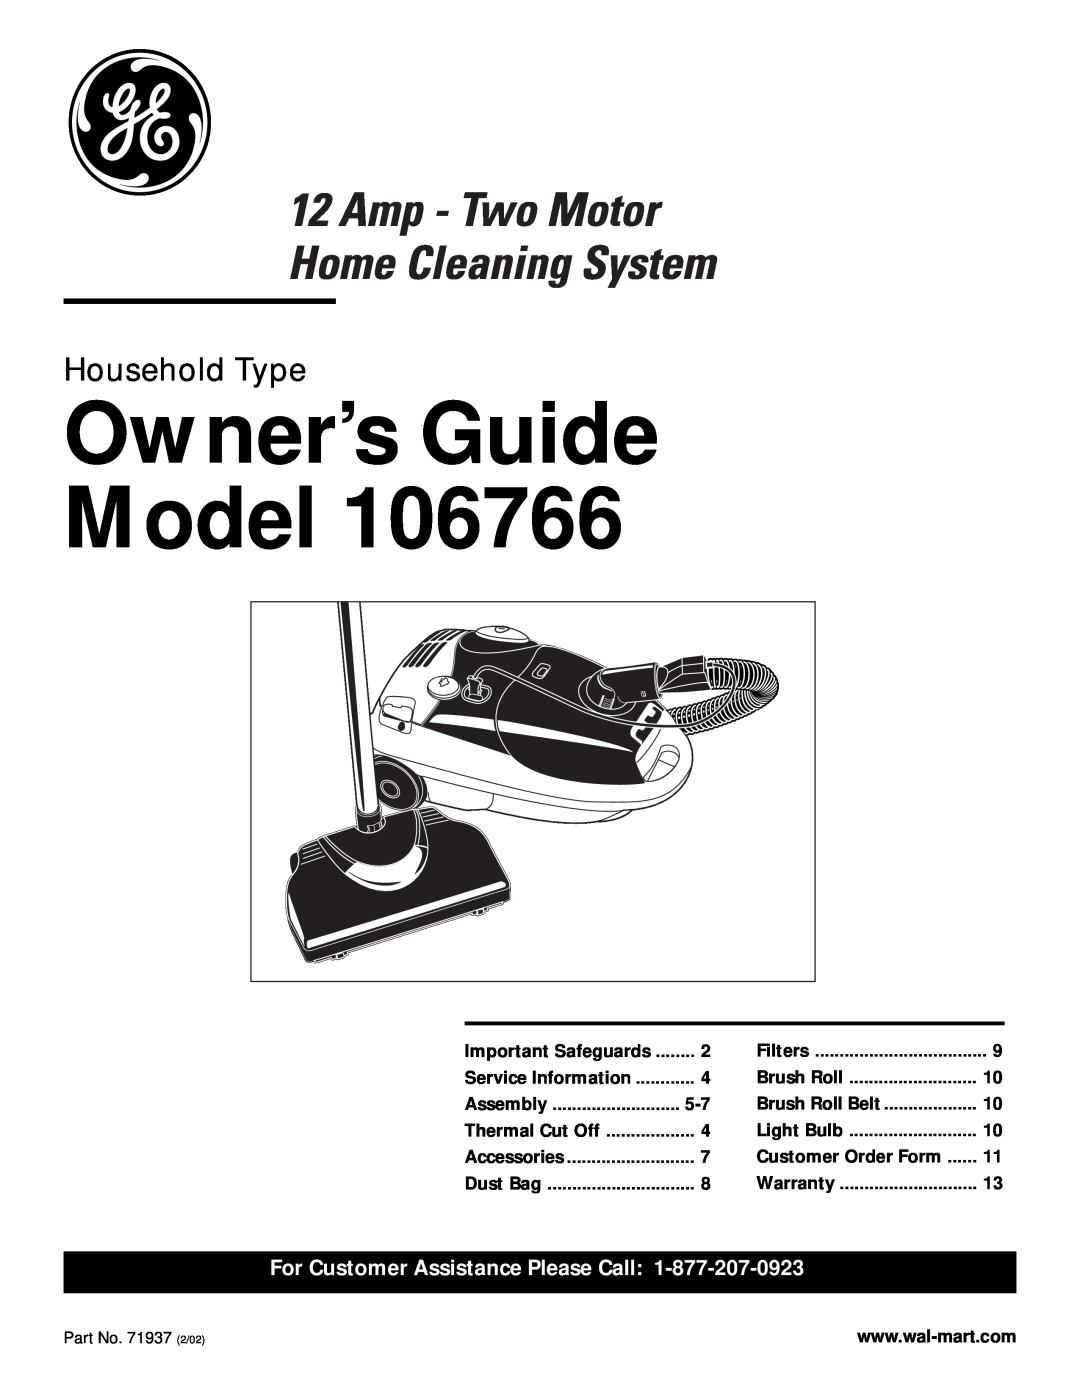 GE 71937, 106766 warranty Owner’s Guide Model, Household Type, For Customer Assistance Please Call, Important Safeguards 